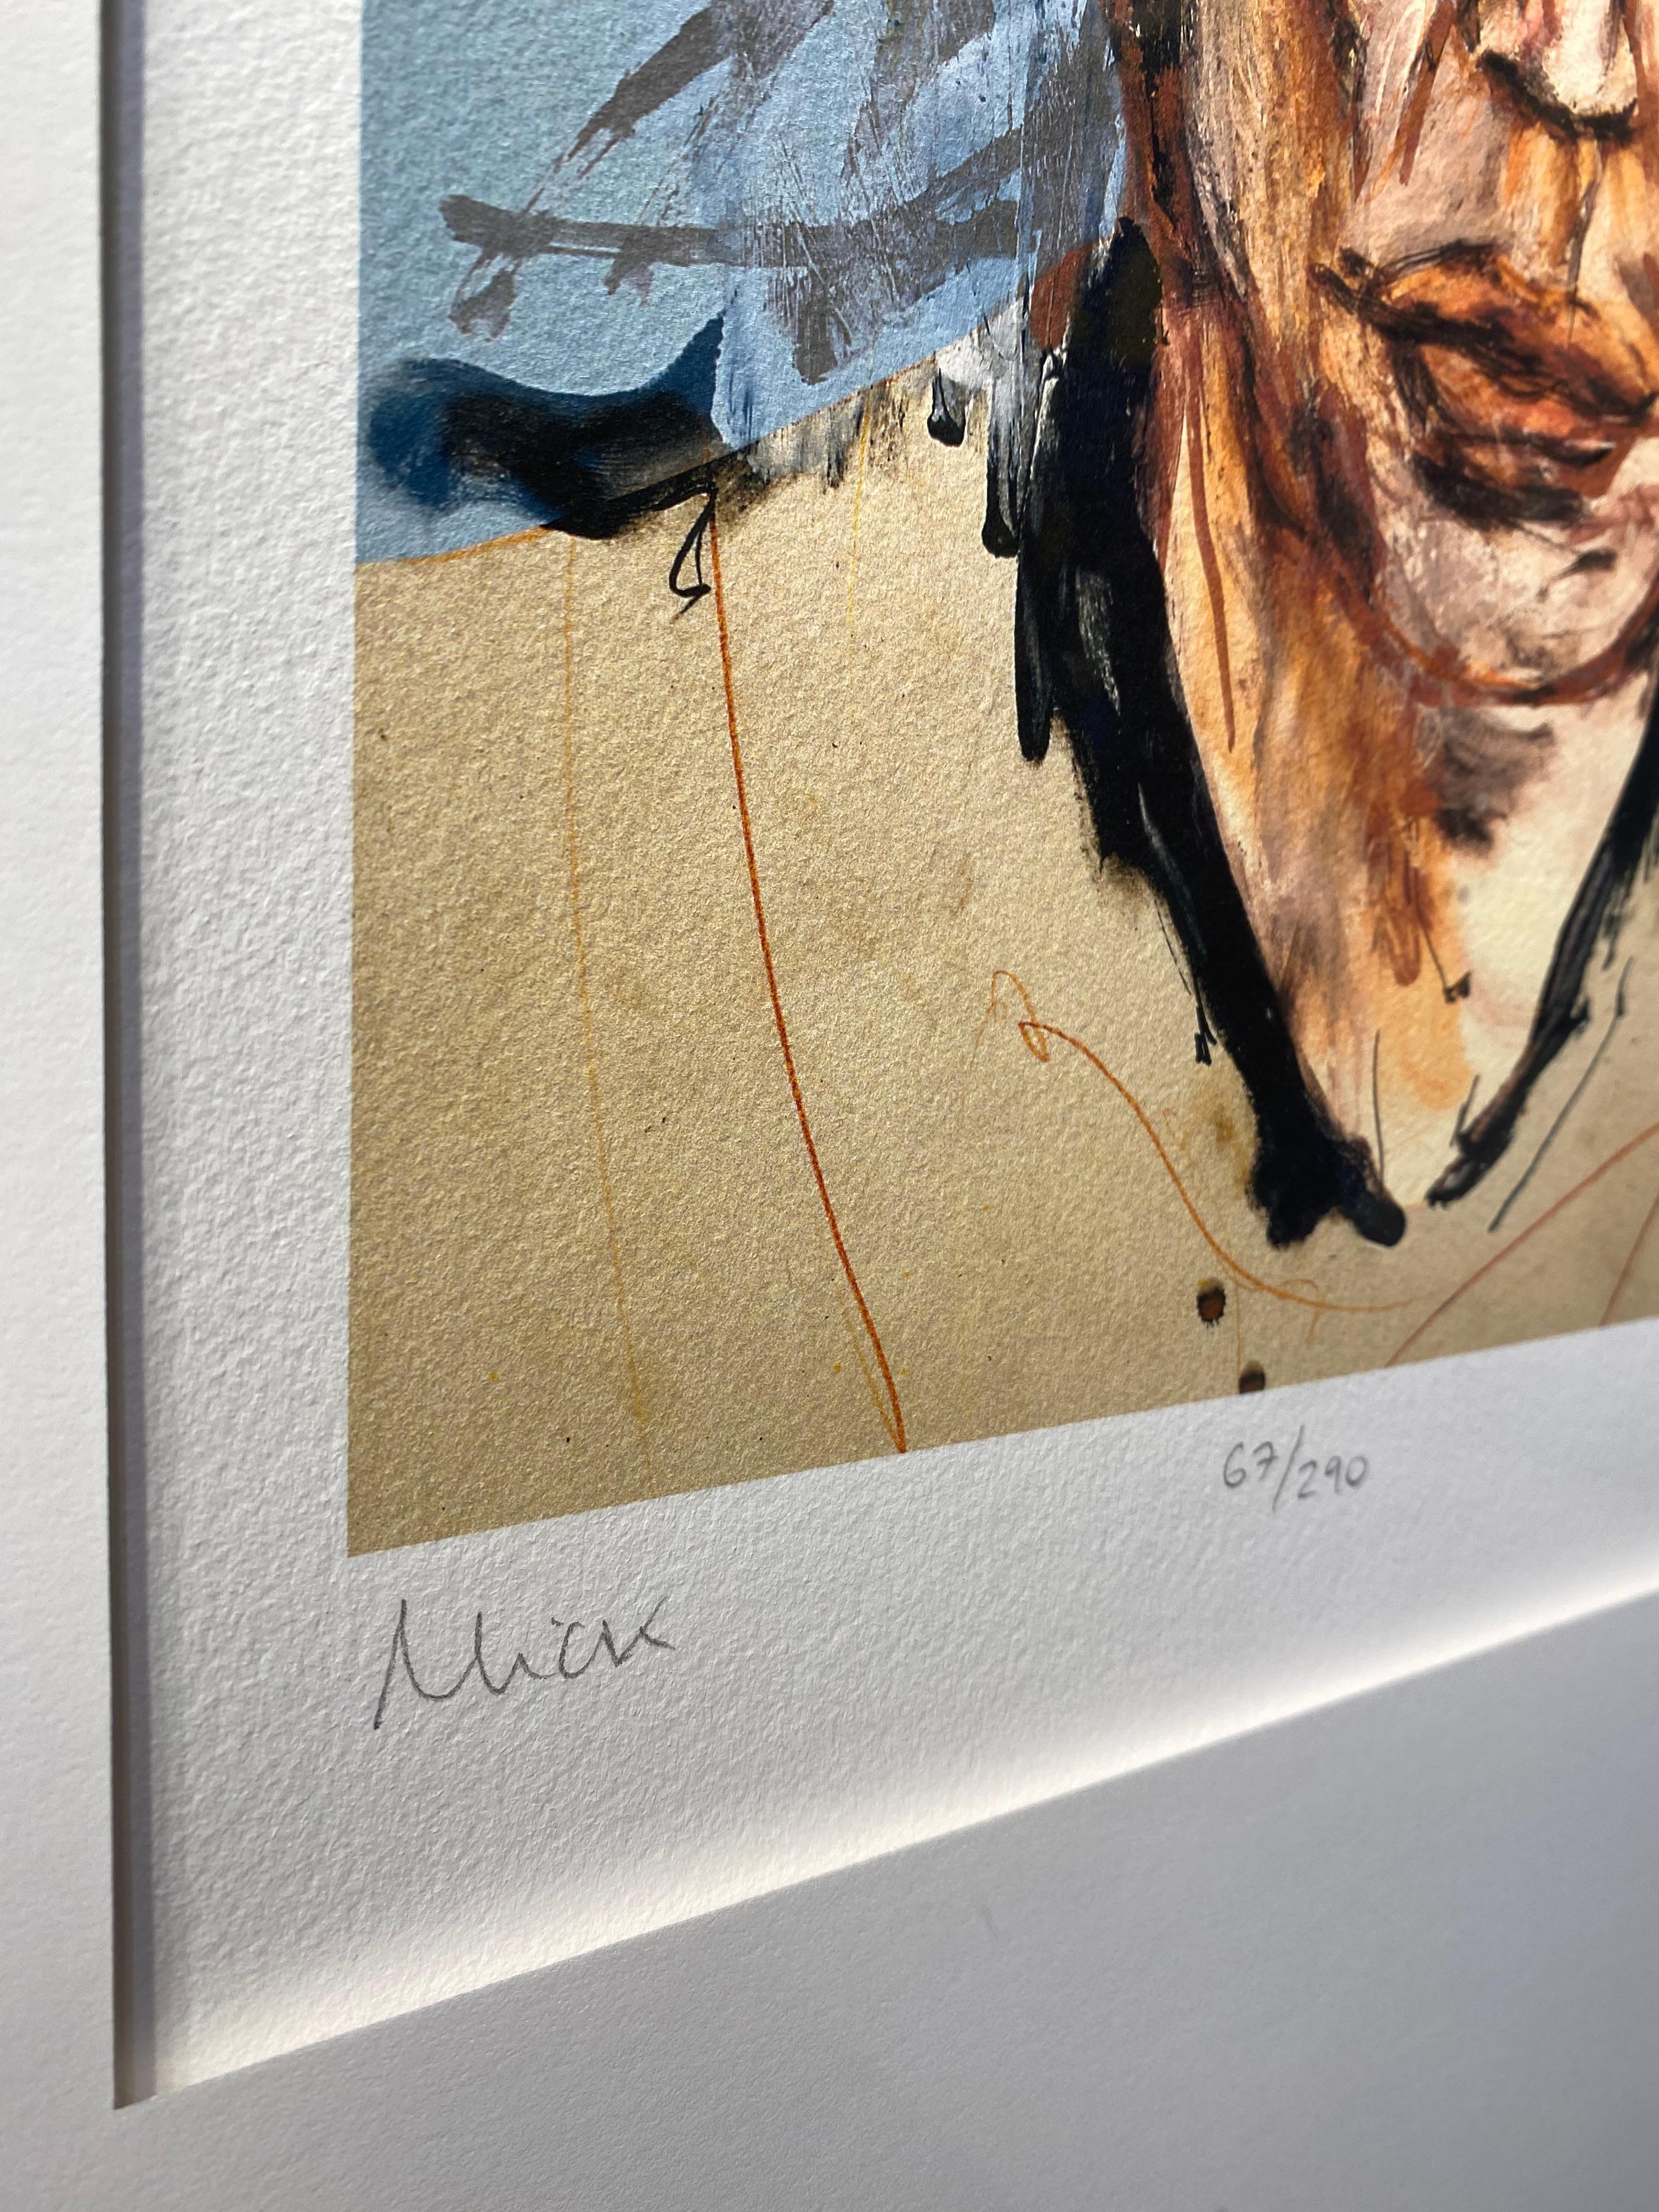 Mick (The Others) - Contemporary Print by Ronnie Wood